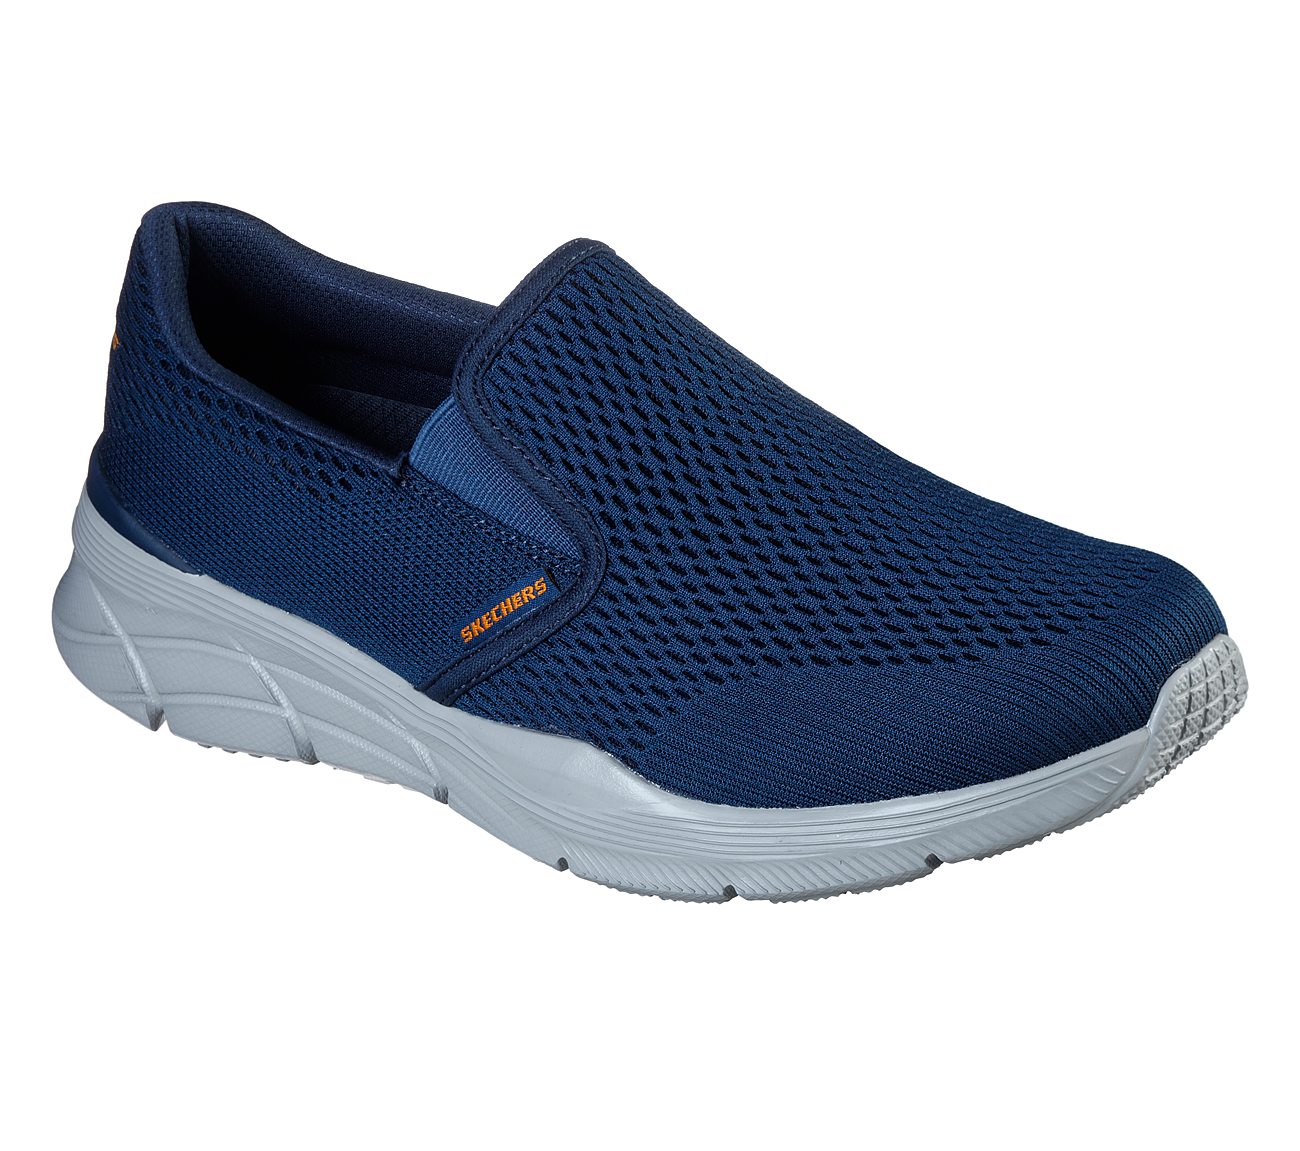 EQUALIZER 4.0 - TRIPLE PLAY, NAVY/ORANGE Footwear Lateral View